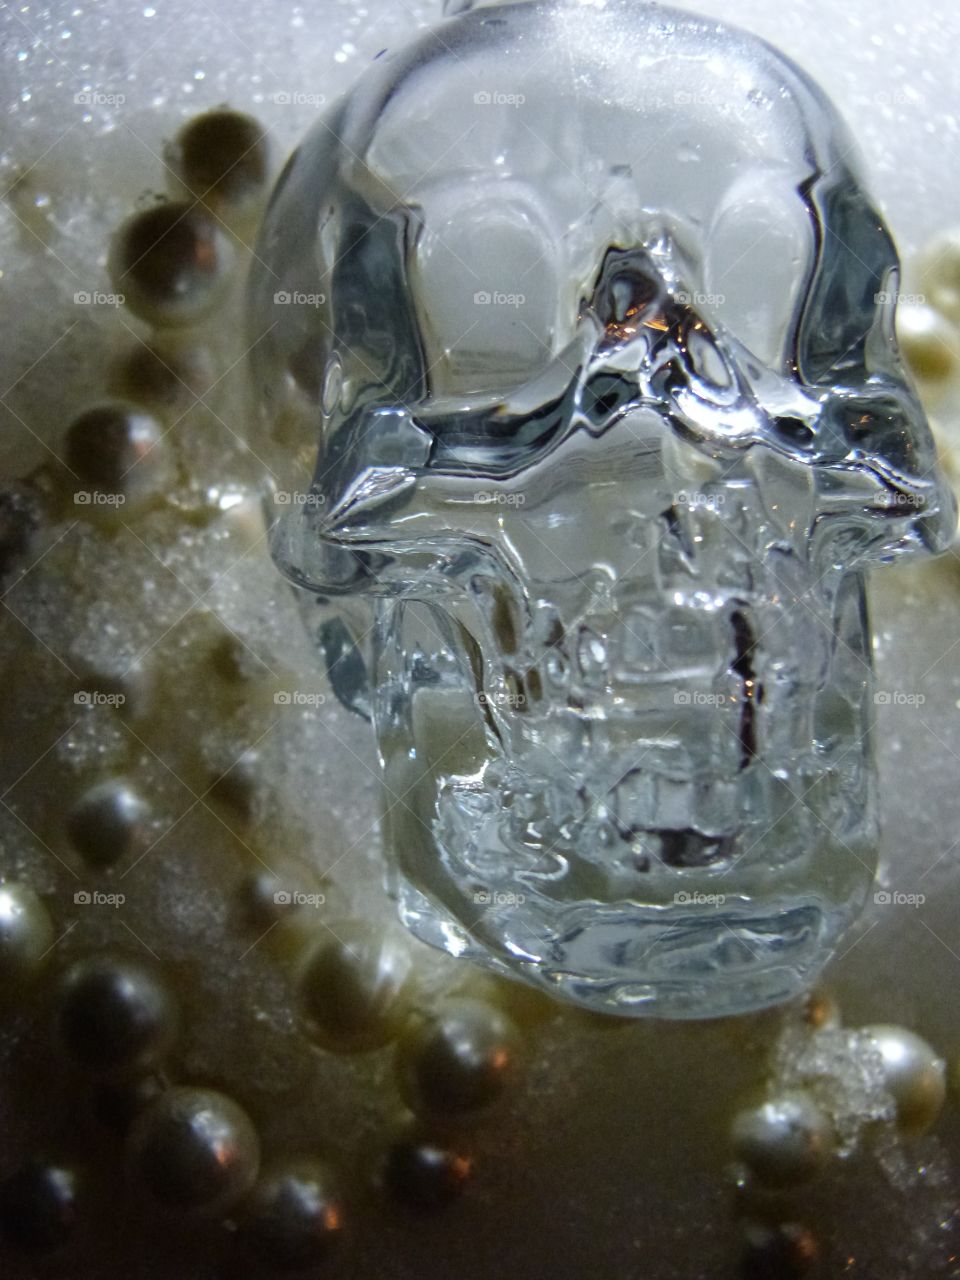 crystal skull in snow and pearls